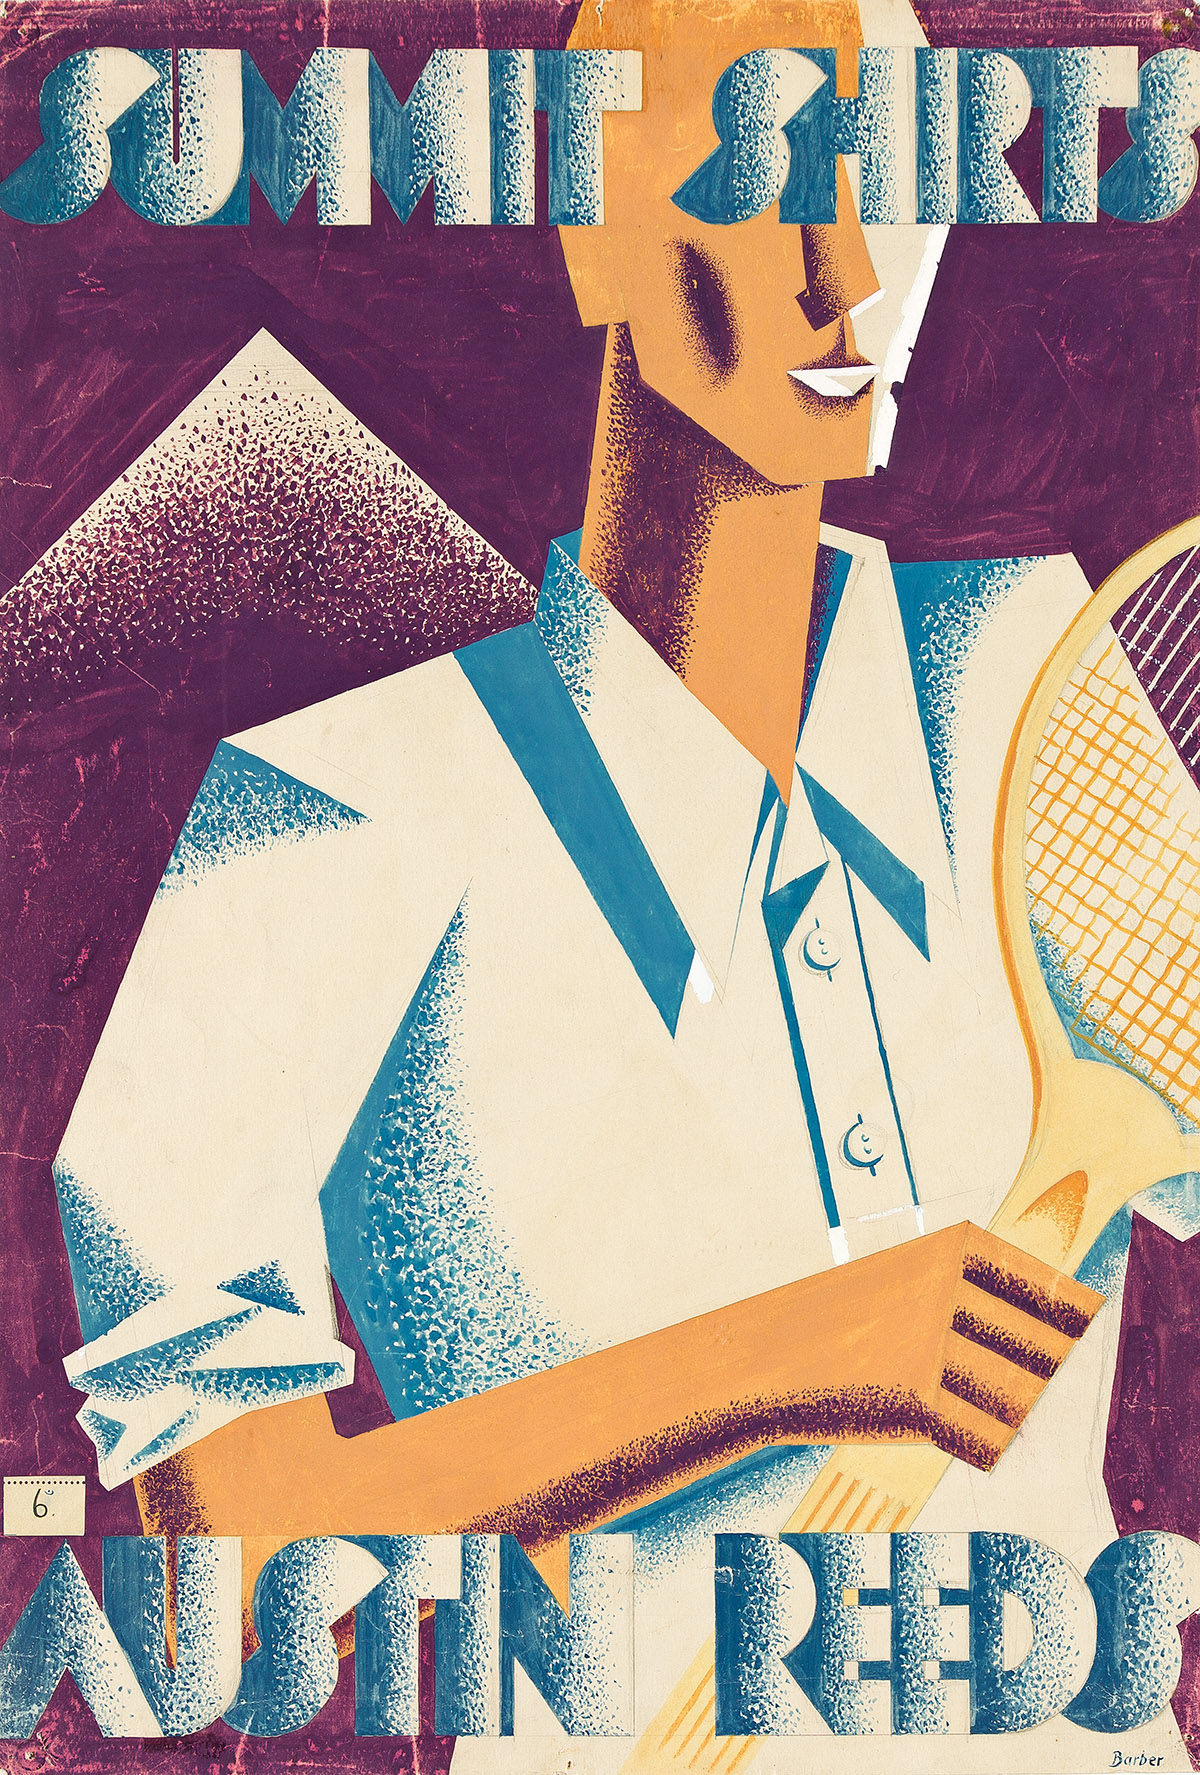 BARBER (DATES UNKNOWN). SUMMIT SHIRTS / AUSTIN REEDS. Gouache maquette. 1935. 22x15 inches, 59x38 cm.